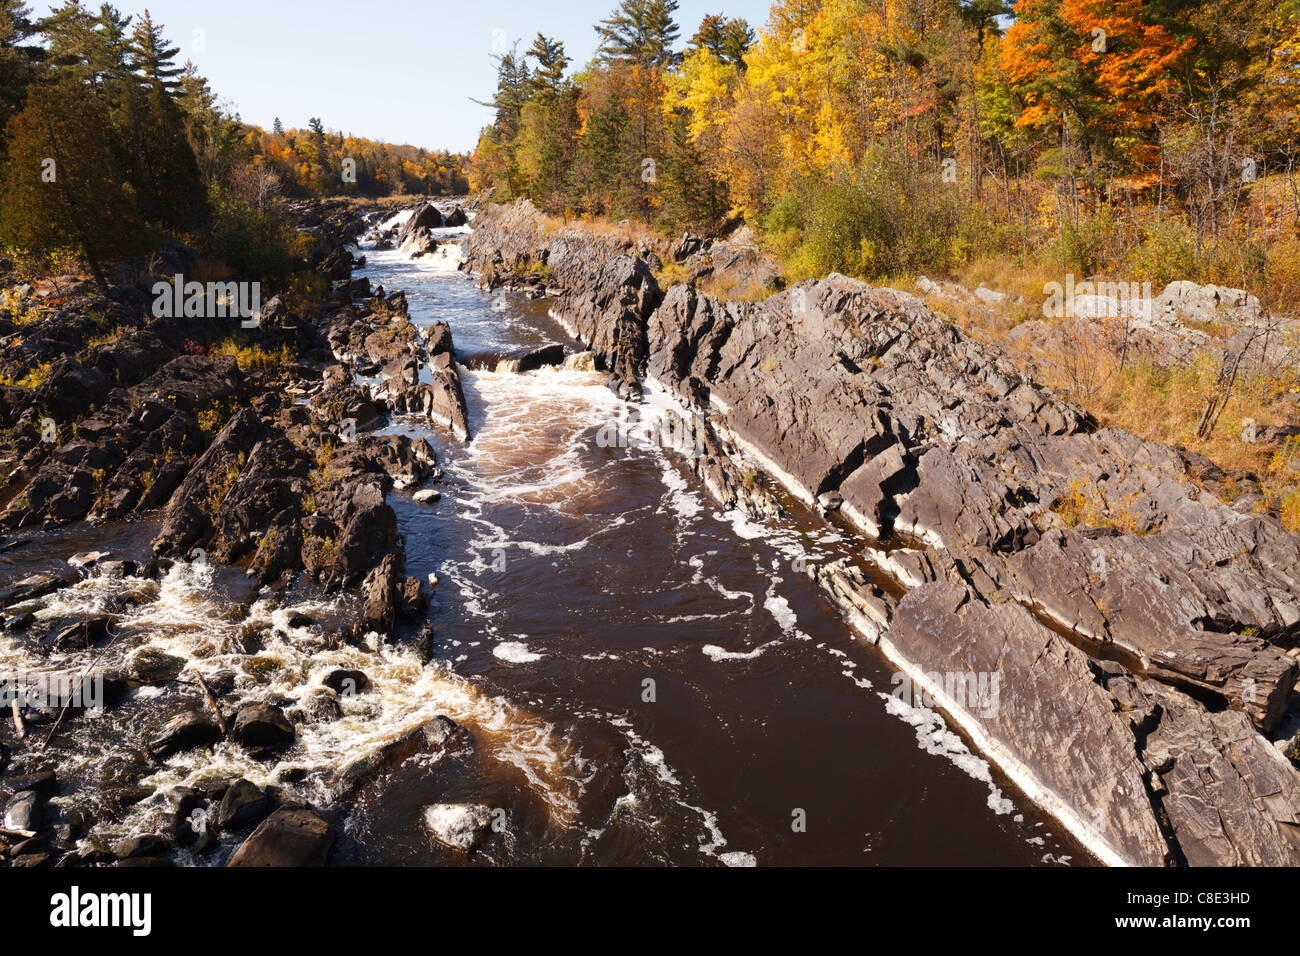 The St. Louis River in Jay Cooke State Park, Minnesota. Stock Photo